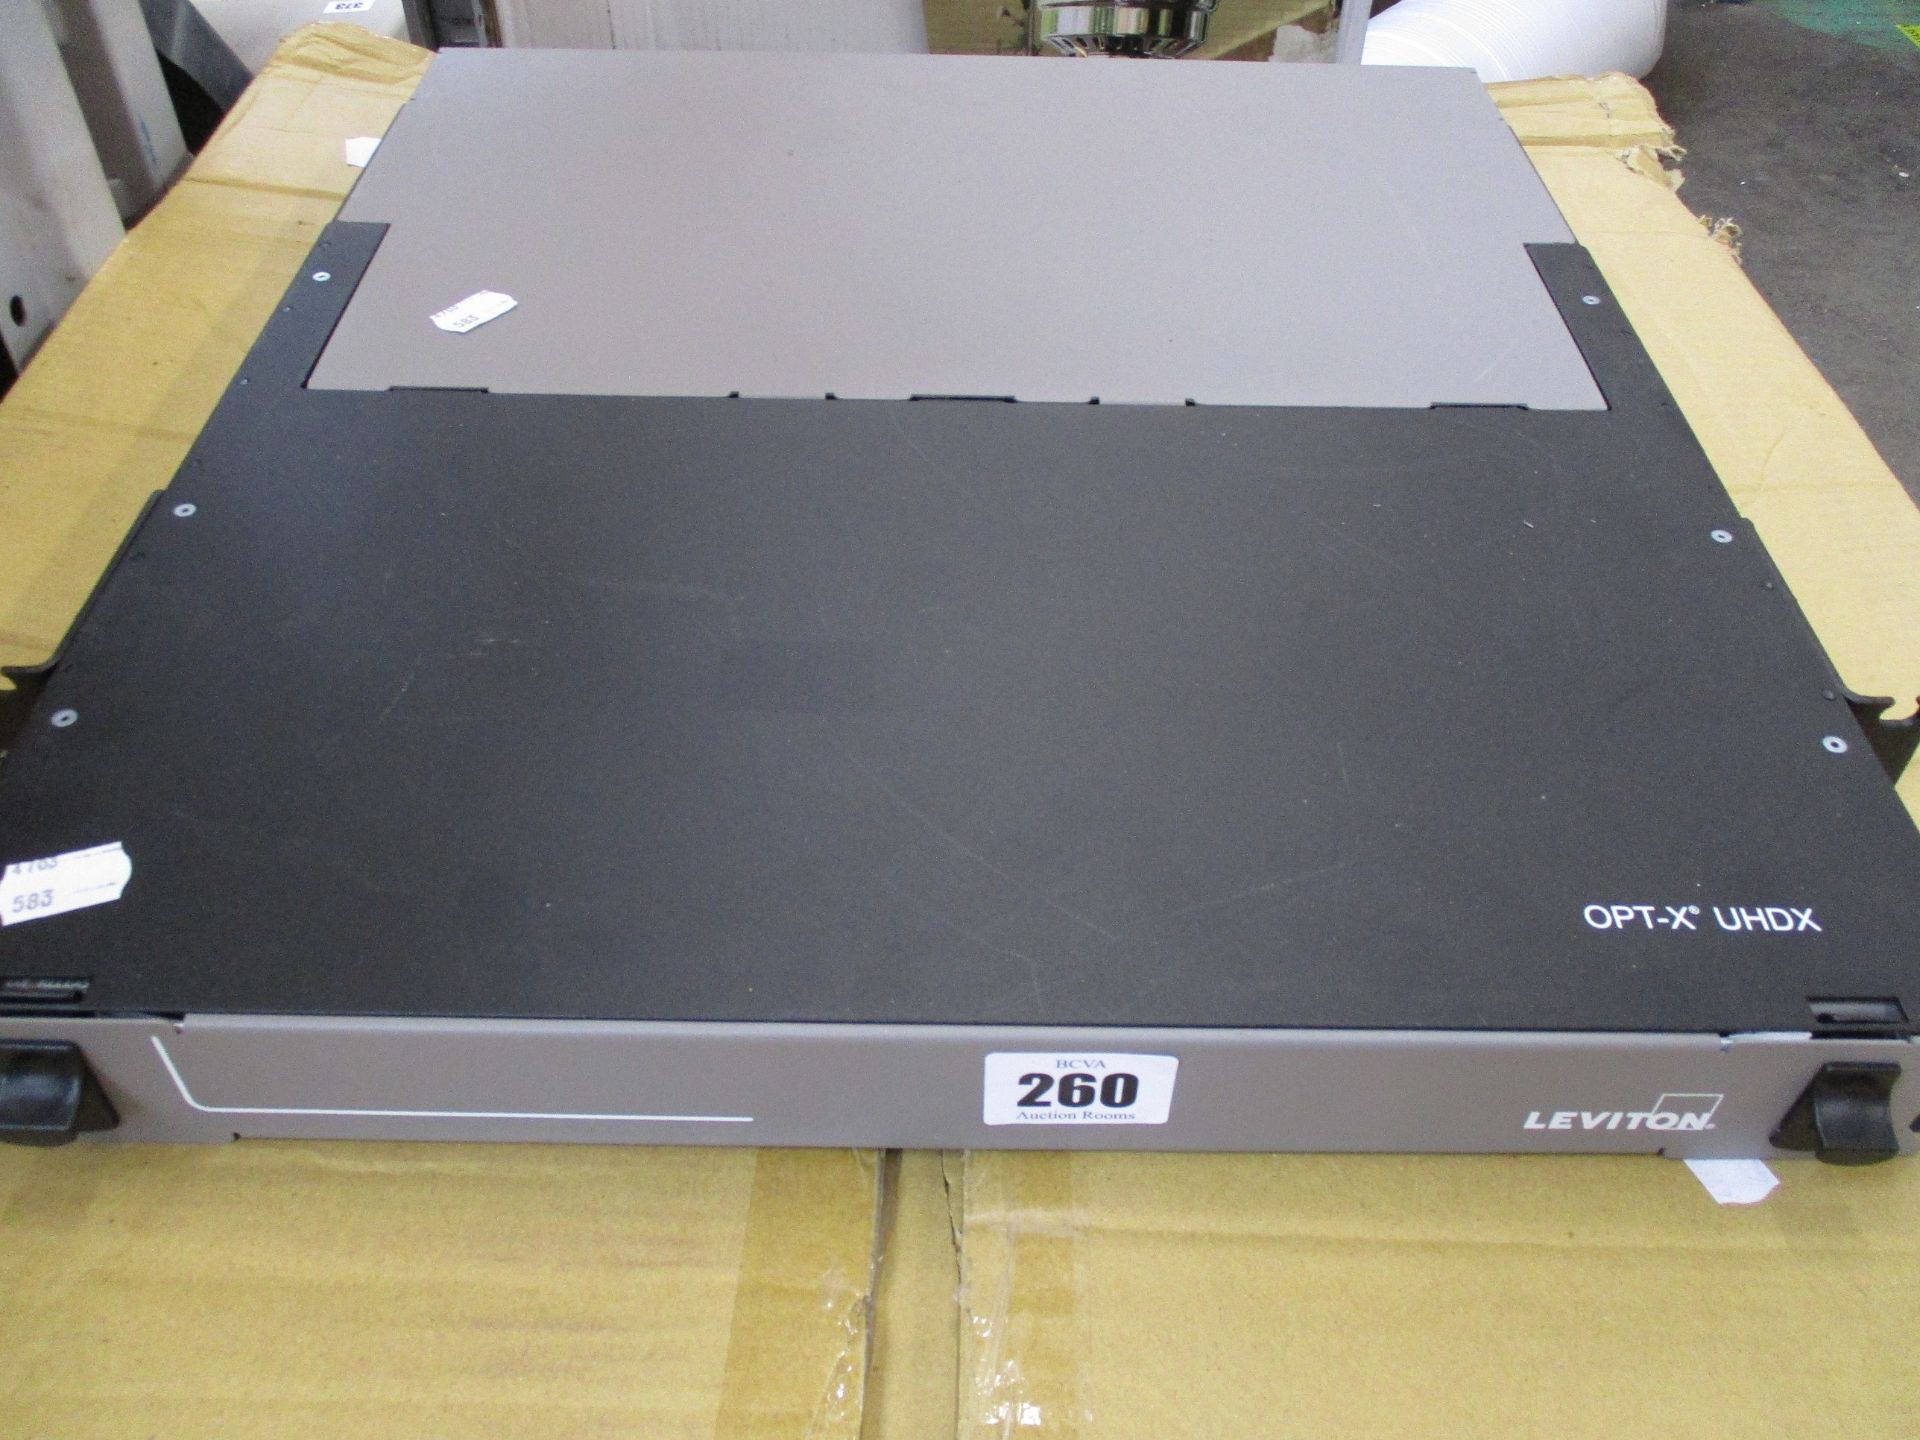 A pre-owned Leviton OPT-X UHDX 1RU Fiber Enclosure (Untested, sold as seen).